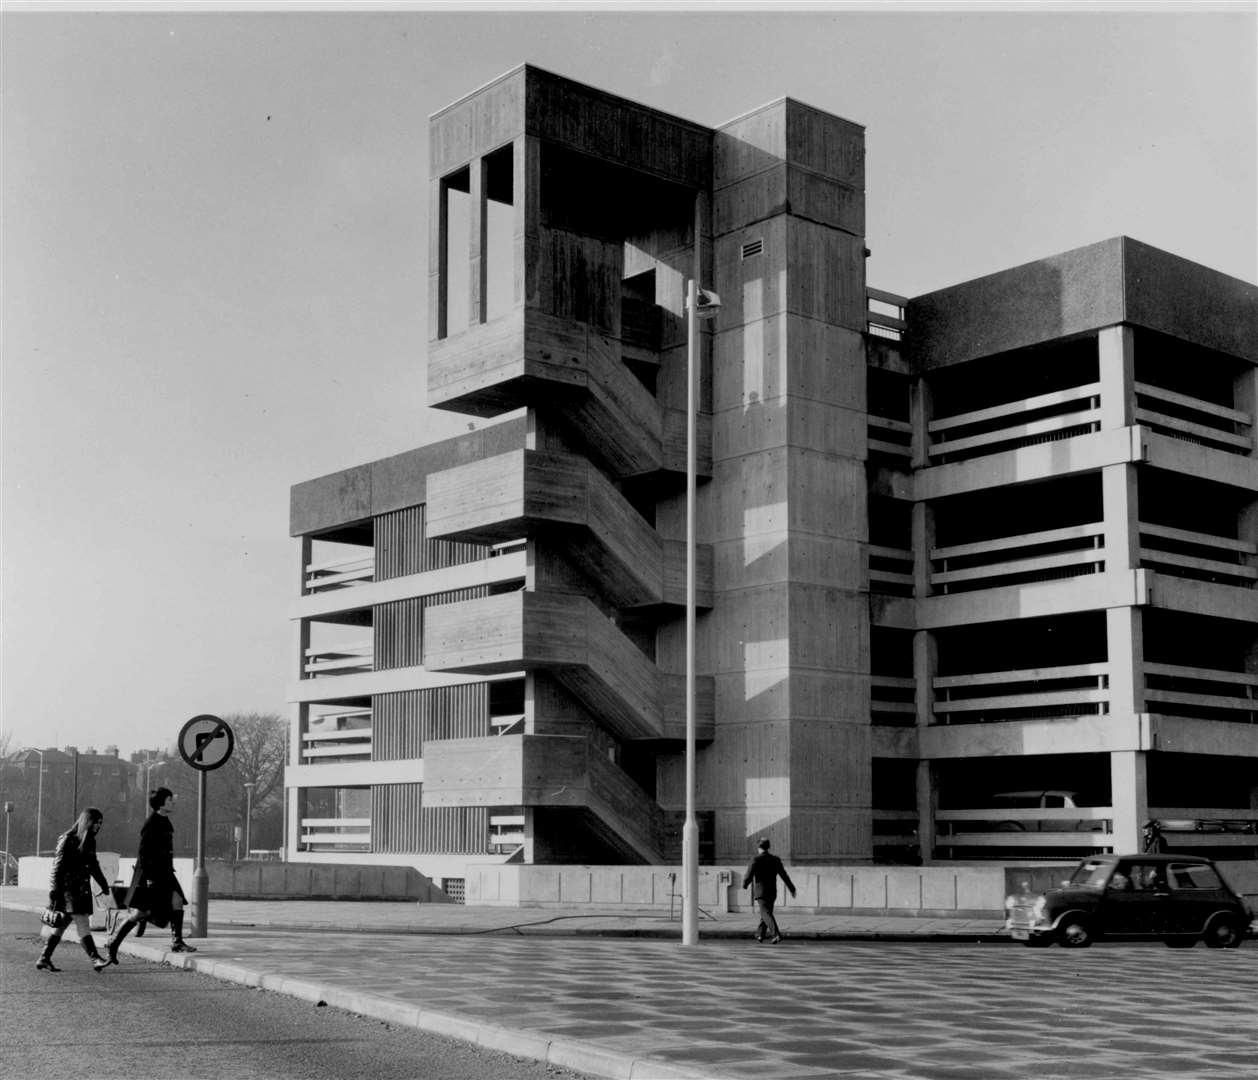 Arguably the ugliest and most criticised building in Canterbury's history, the multi-storey car park between Gravel Walk and Watling Street is pictured in February 1970, a few months after opening. It was originally planned to be two floors higher. This was the view from St George's Lane.